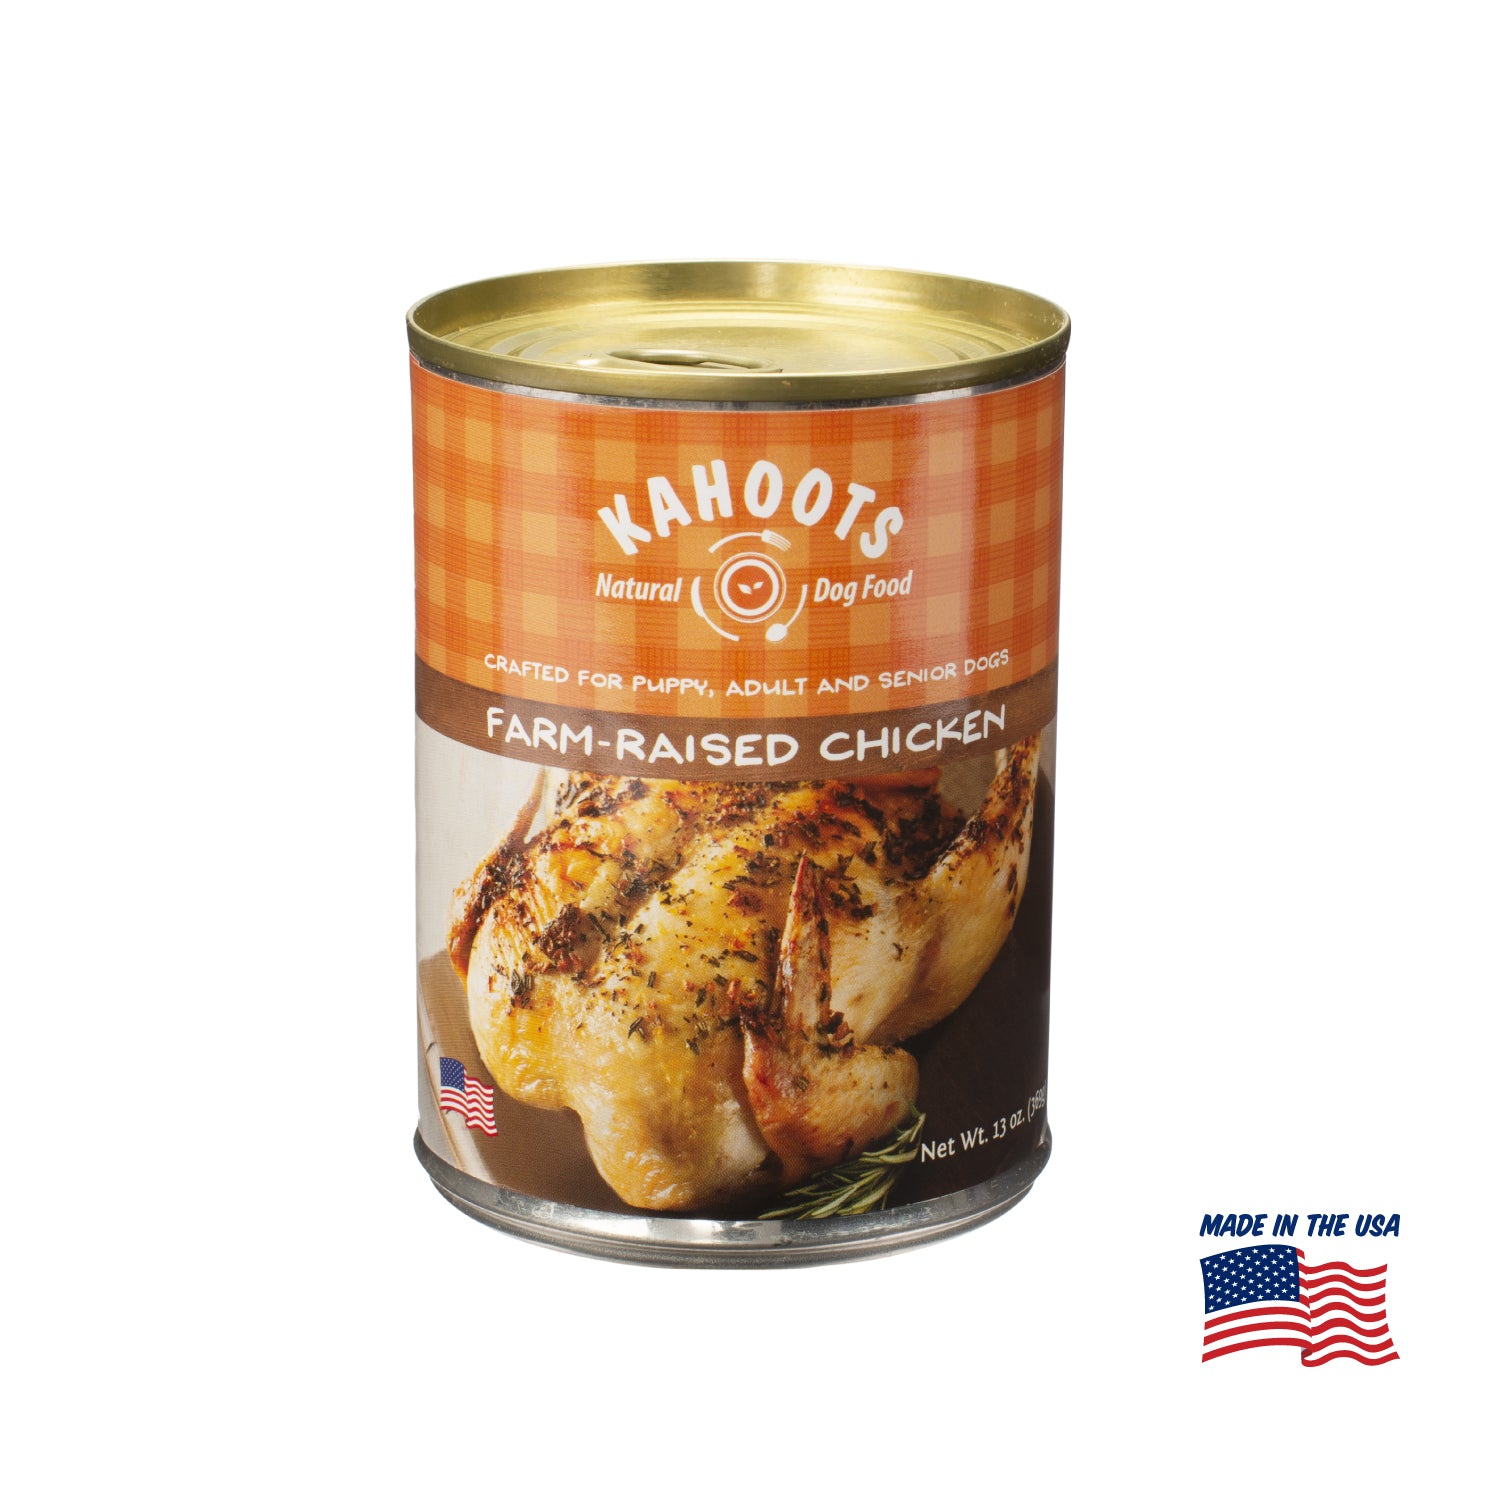 Kahoots chicken wet dog food can, made in the USA